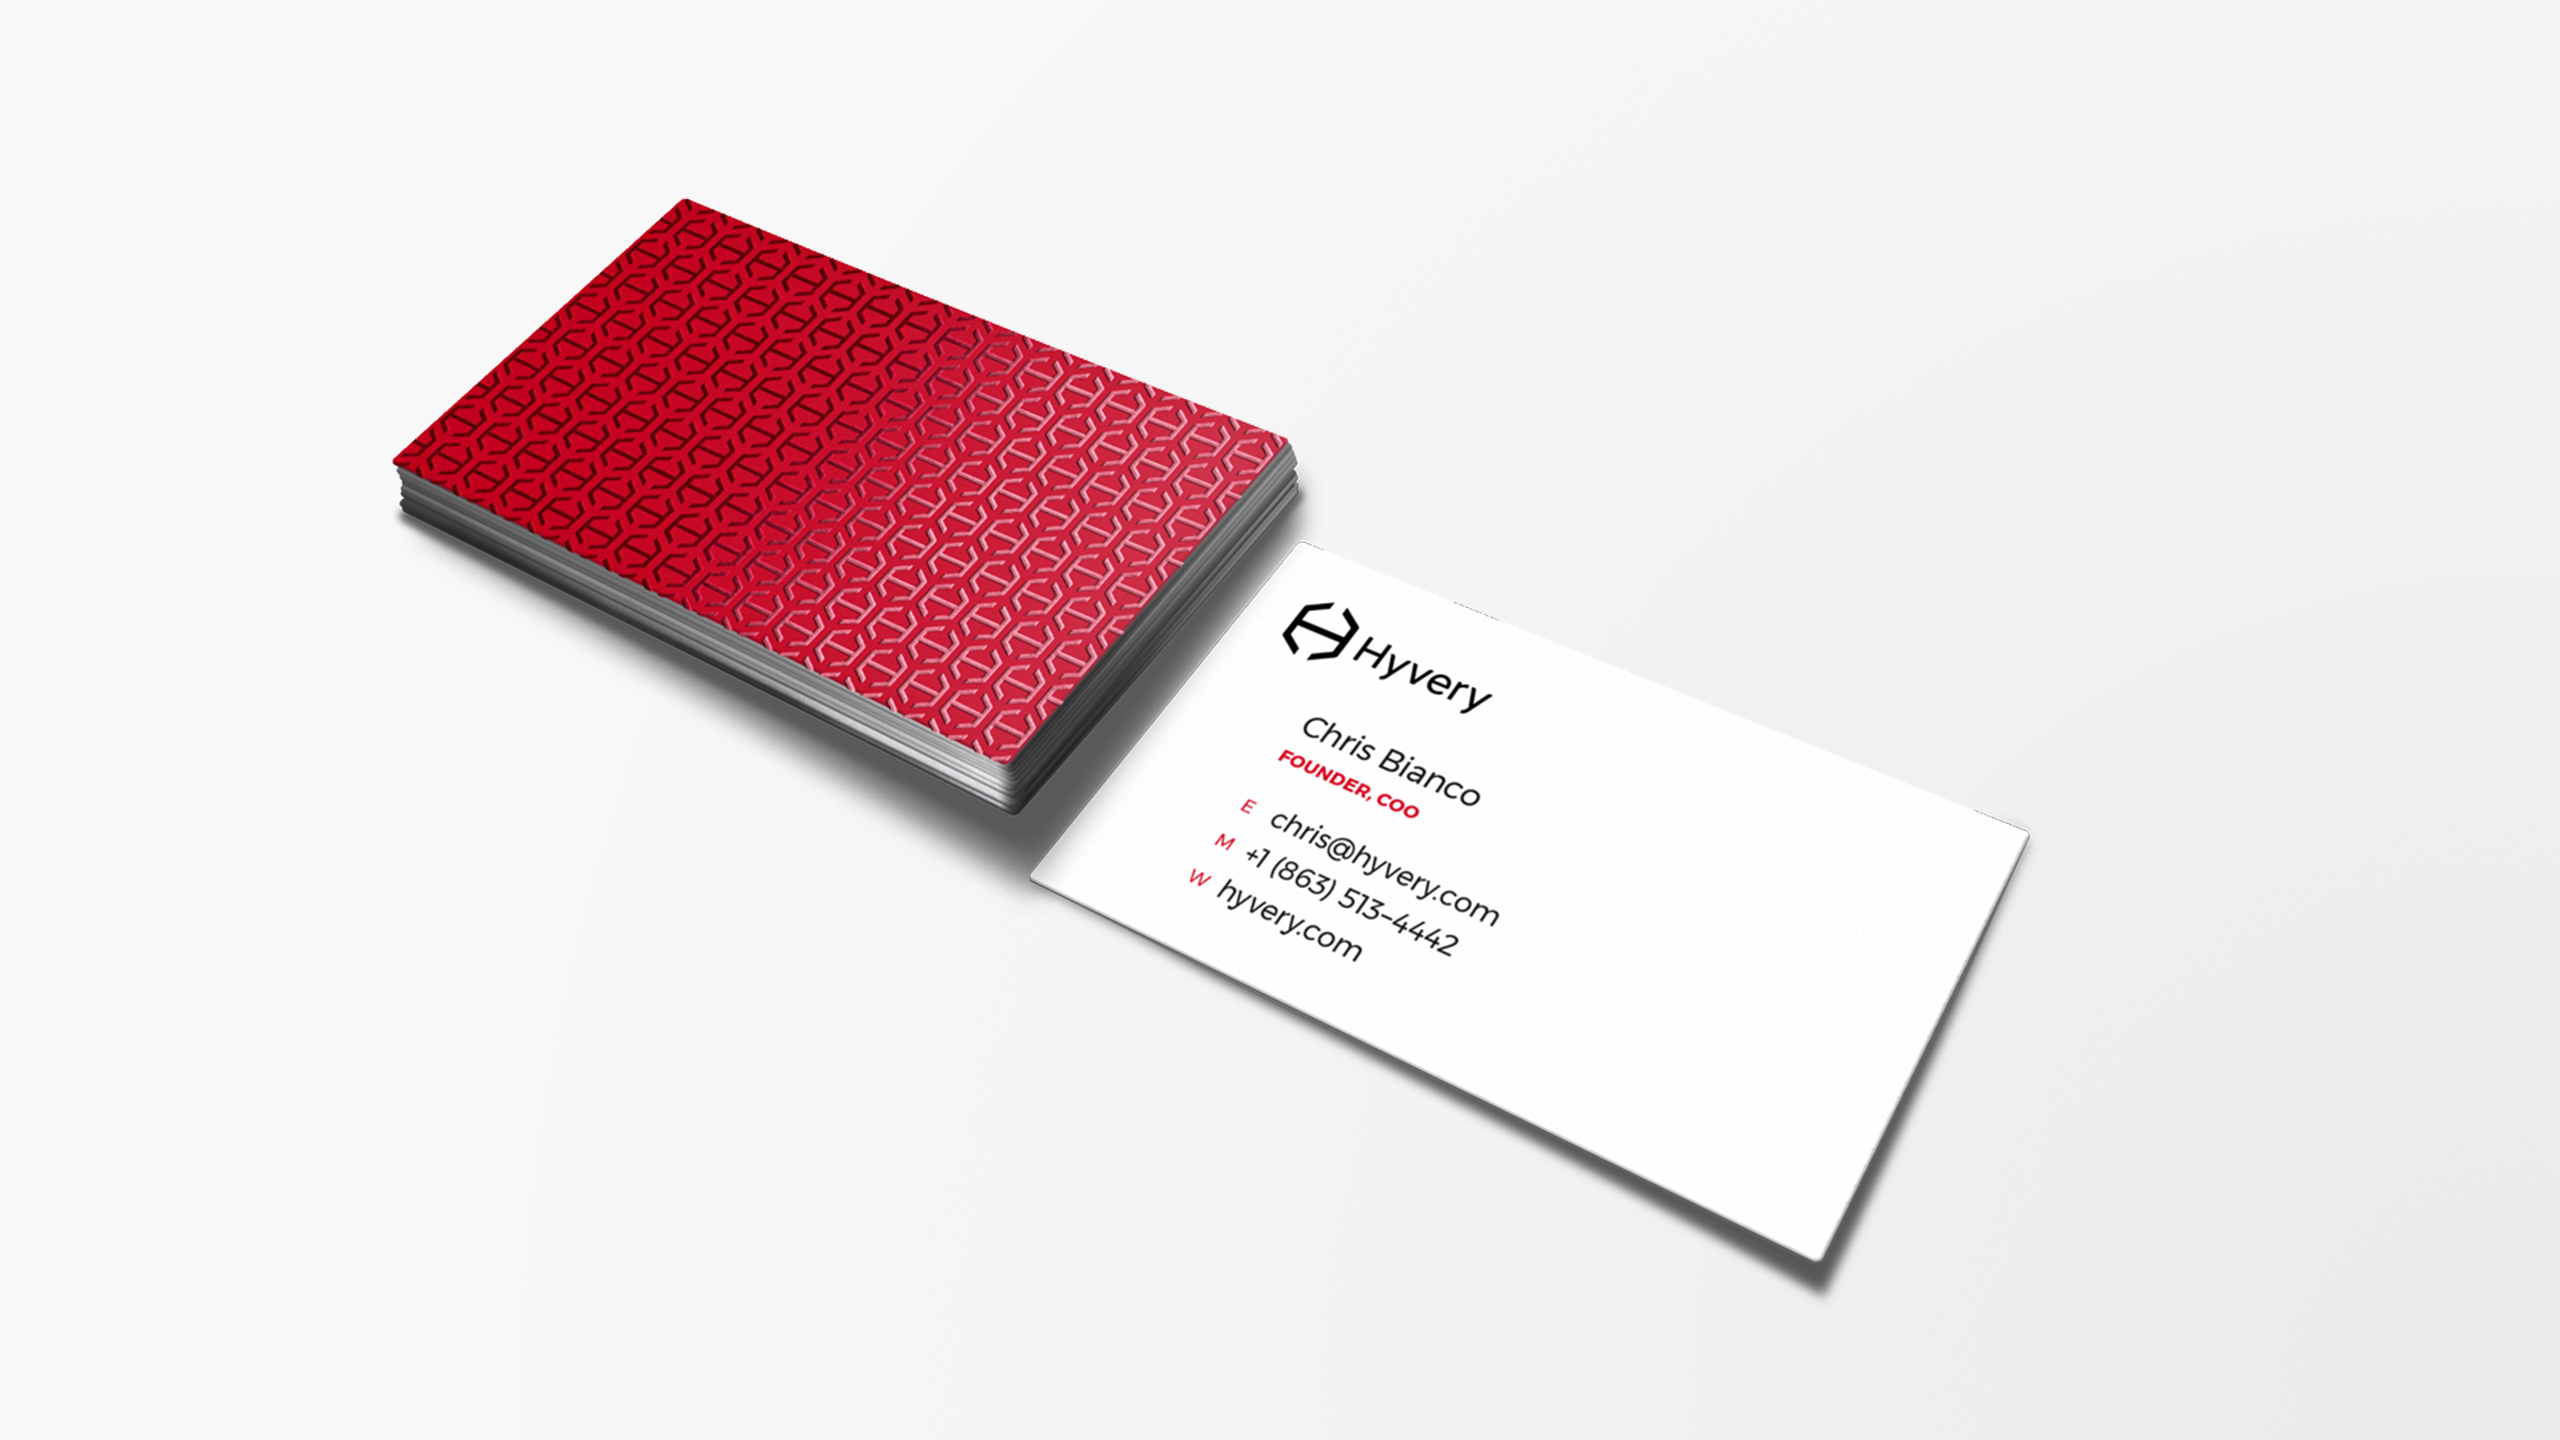 Hyvery Business Cards by The Coopers